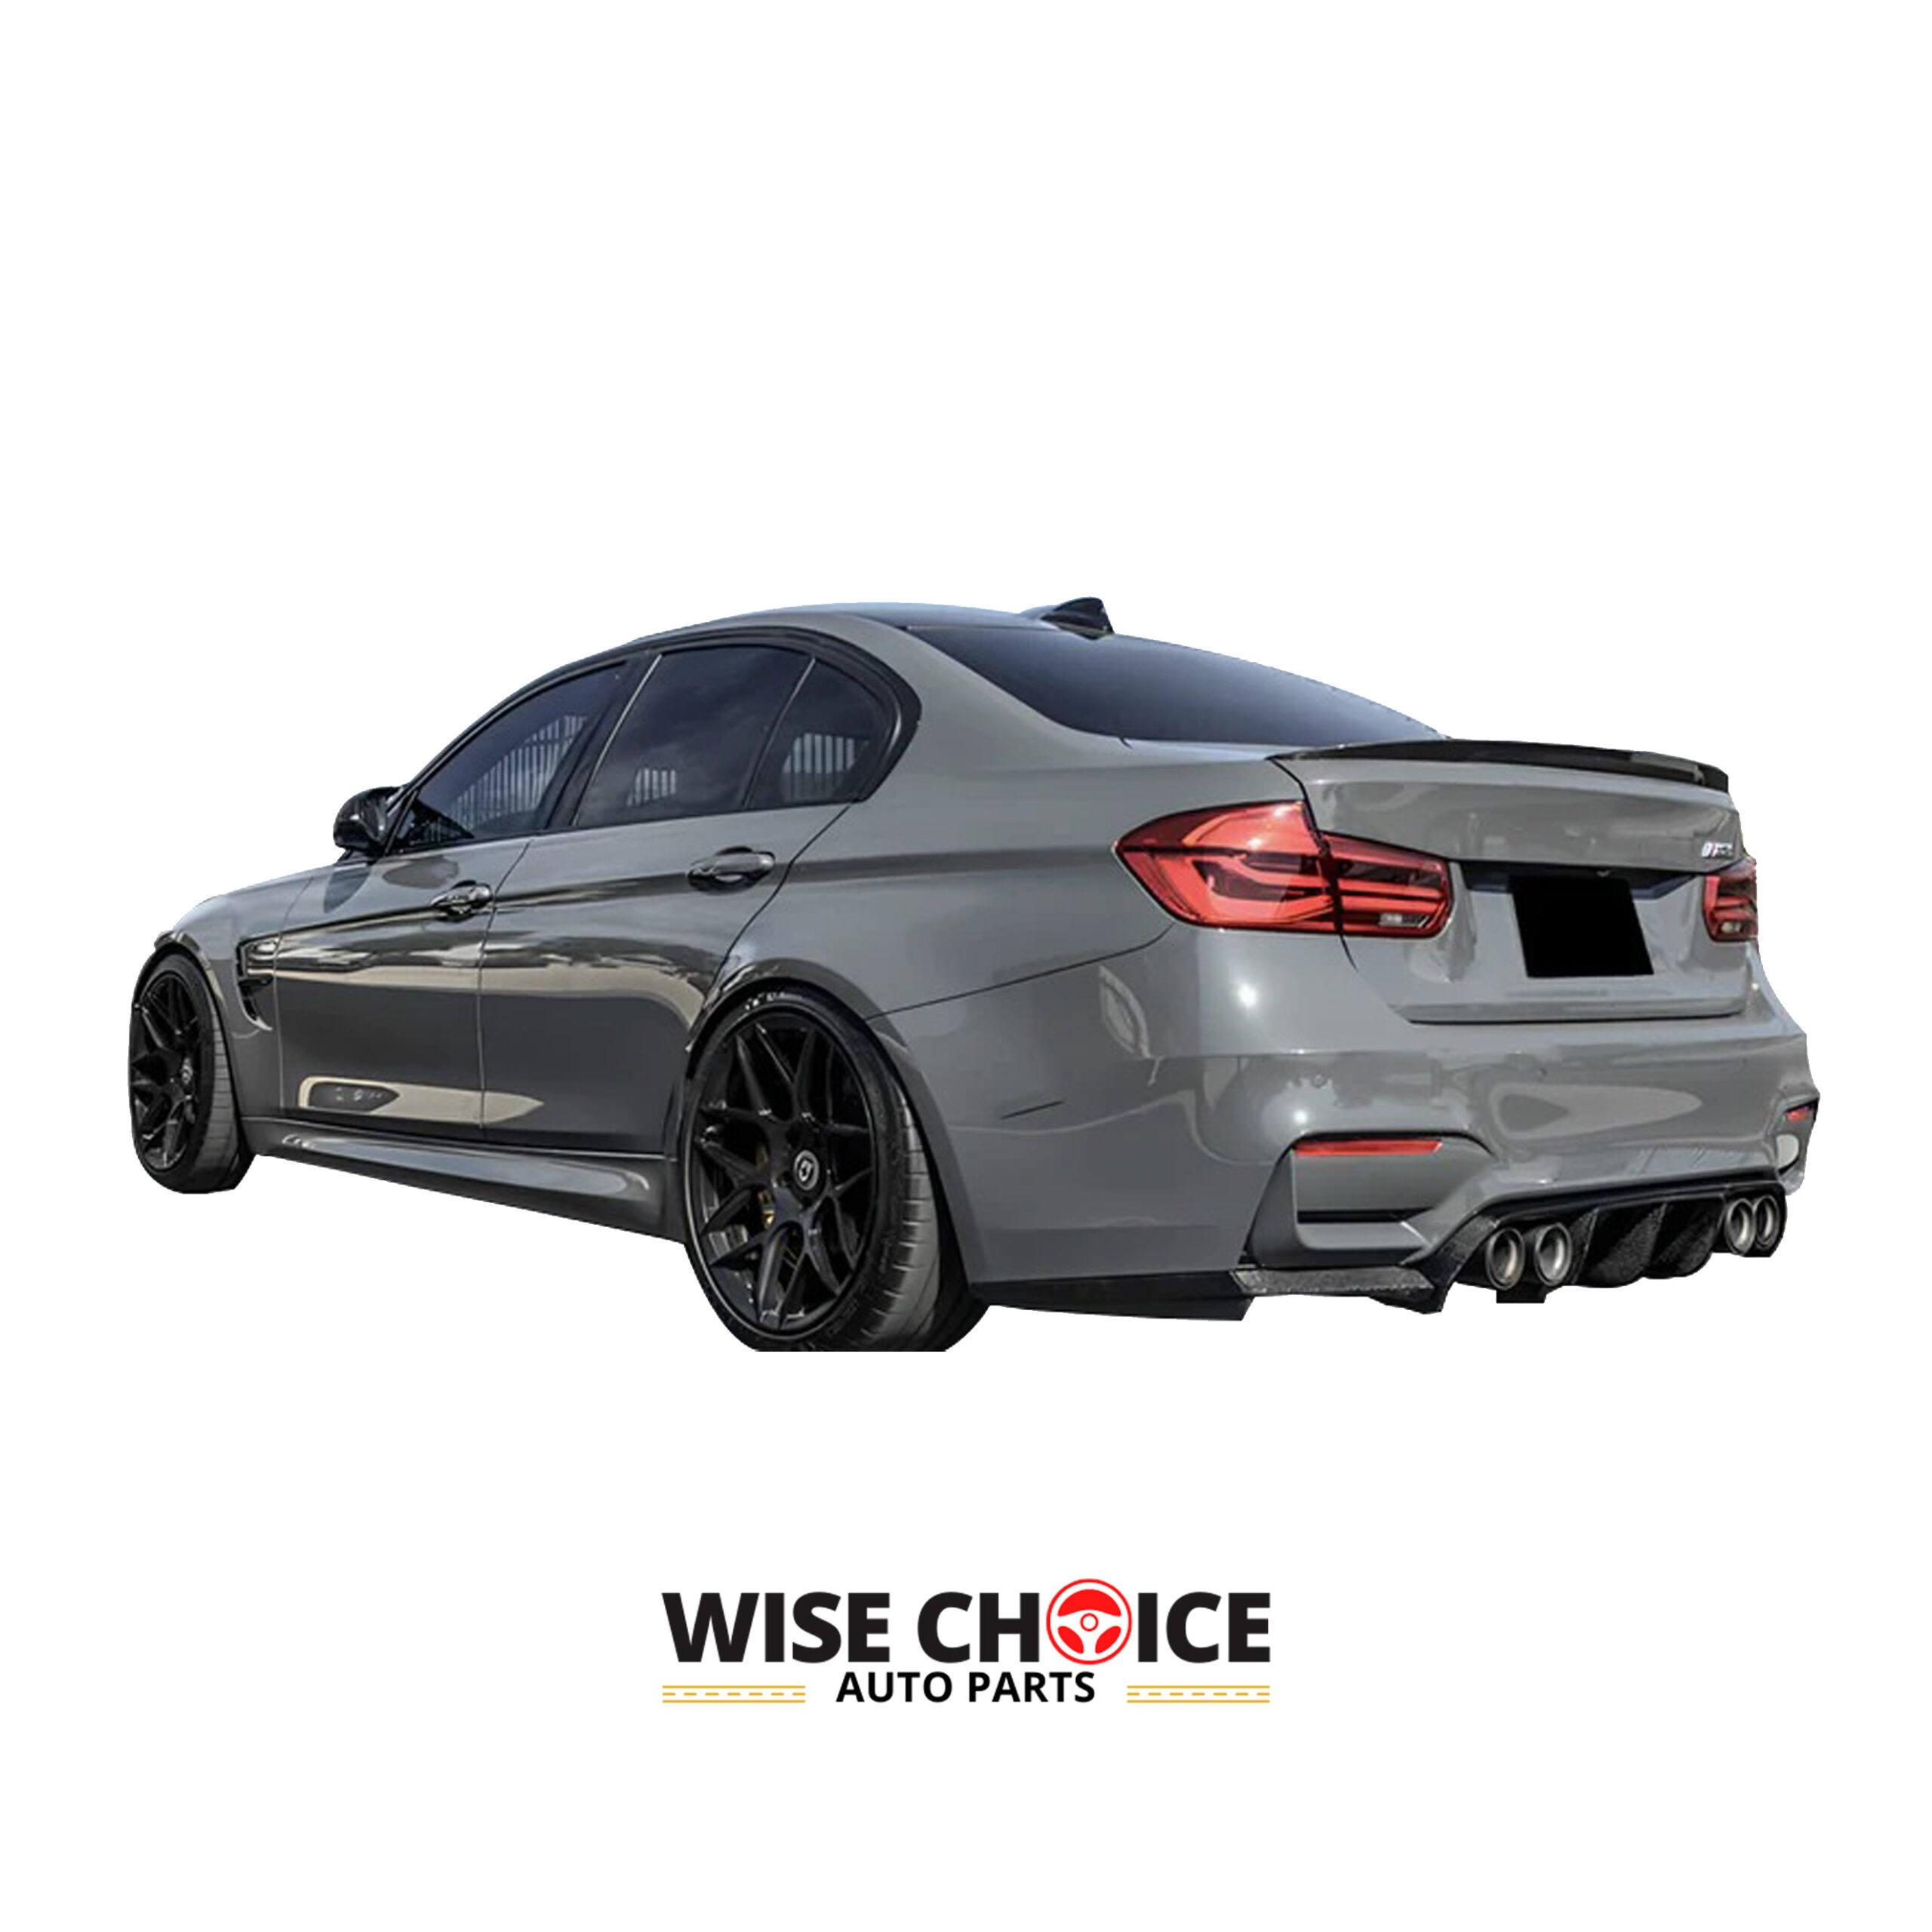 High-quality, aggressive F30 BMW 3 Series and F80 M3 carbon trunk spoiler for 2012-2018 models.